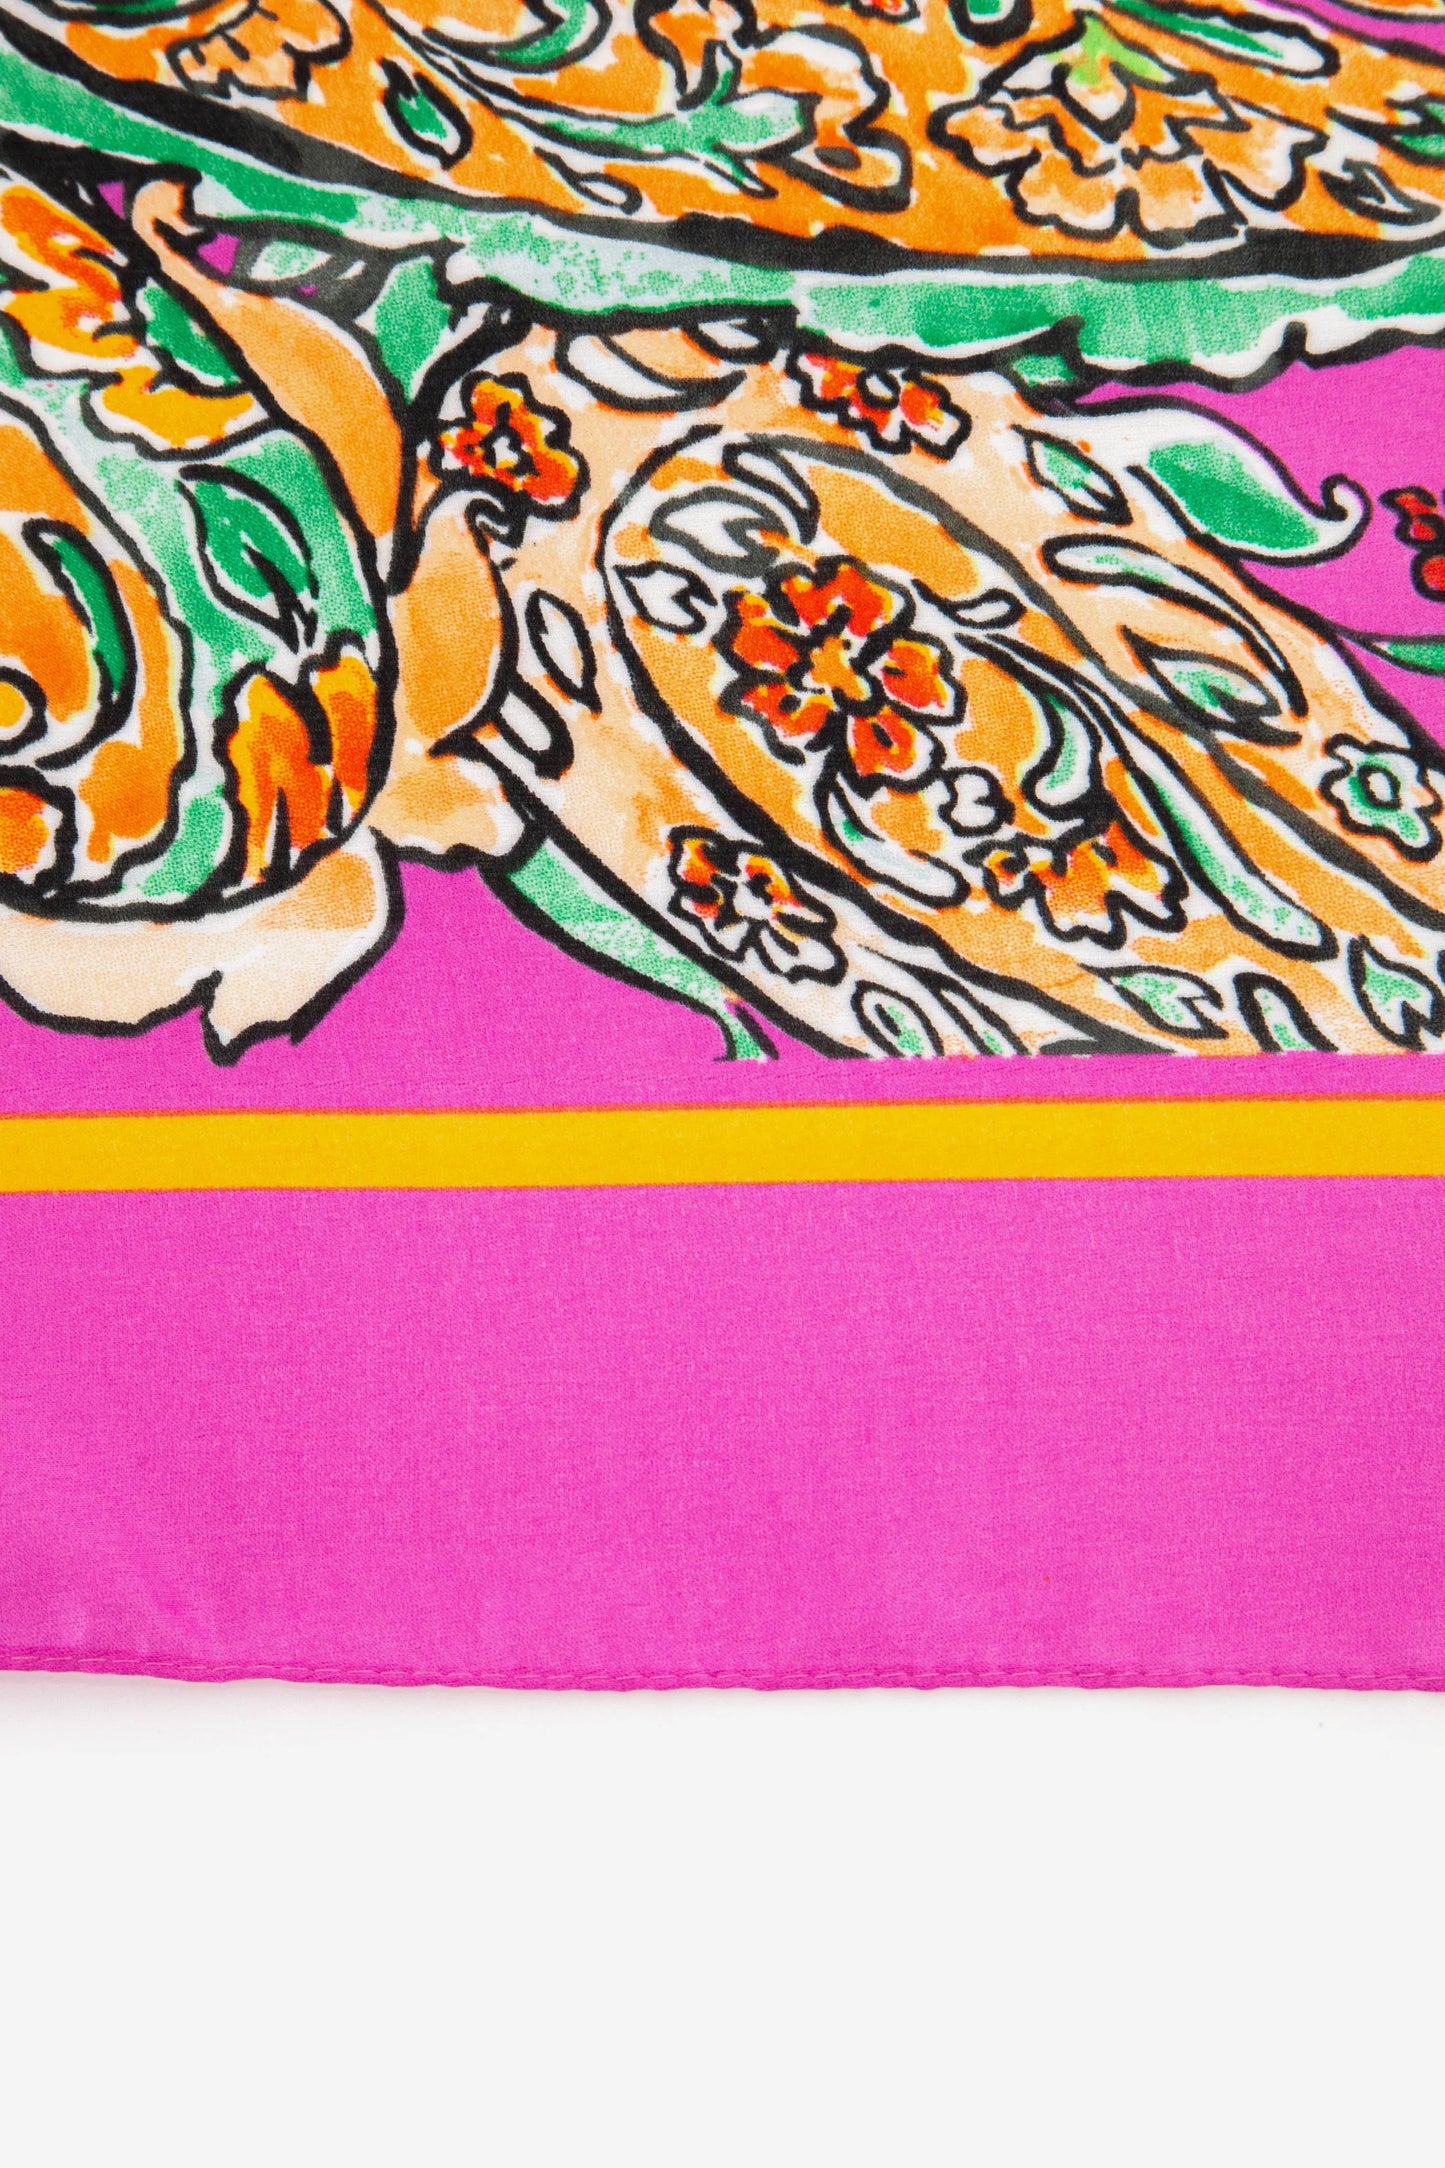 Textured Paisley Print Faux Silk Scarf with Colourblock Border - Hot Pink